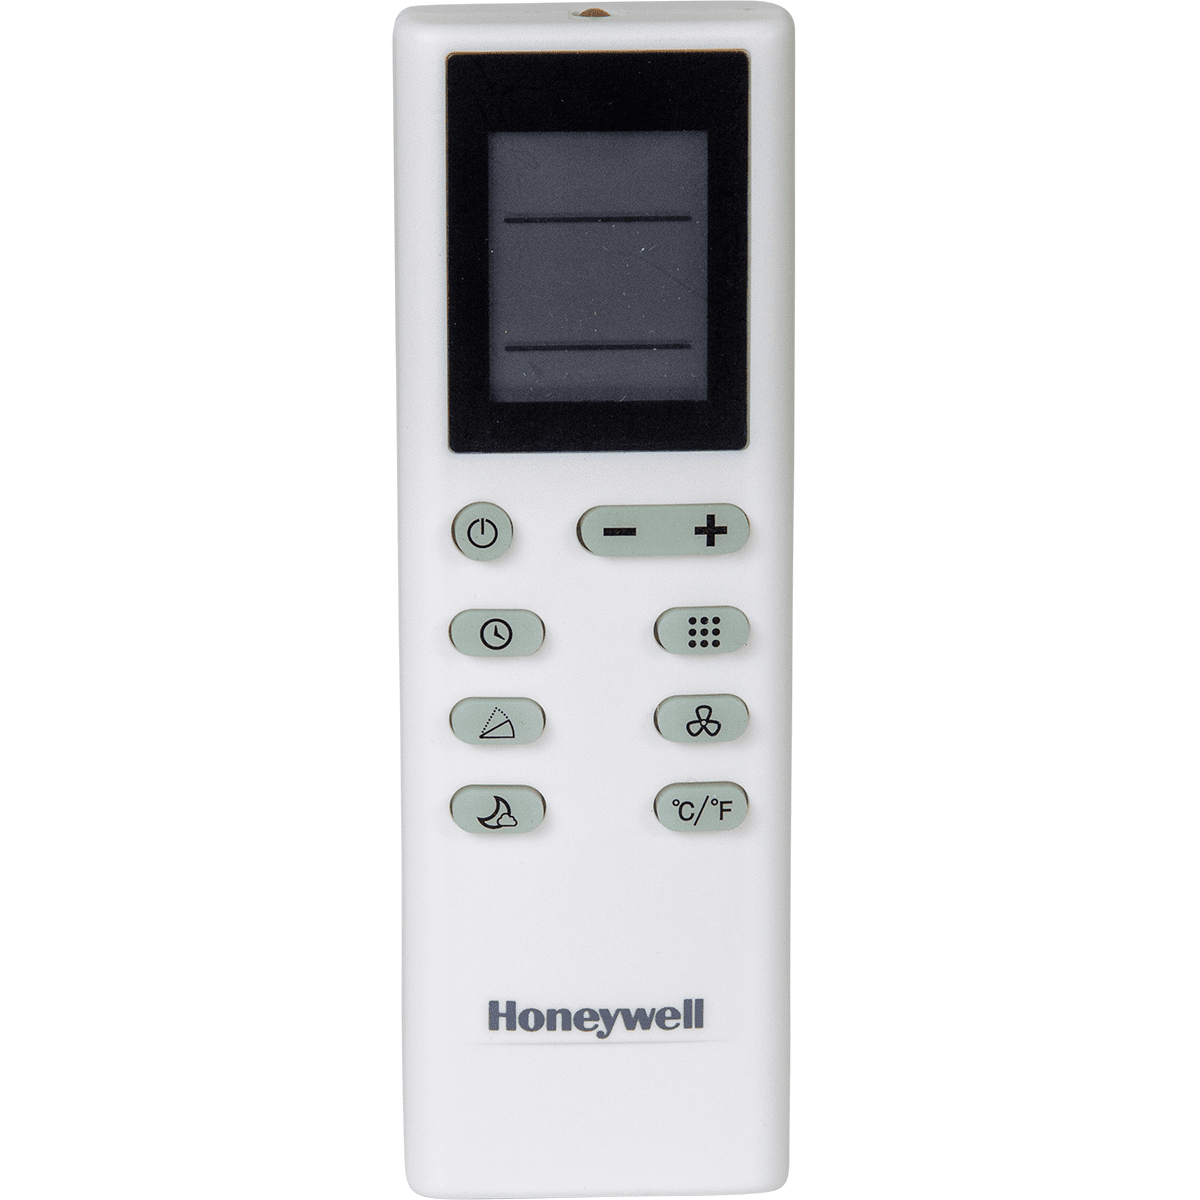 Honeywell Replacement Remote Control for HJ5CESWK0 (T06-YK-00211-1-P47)